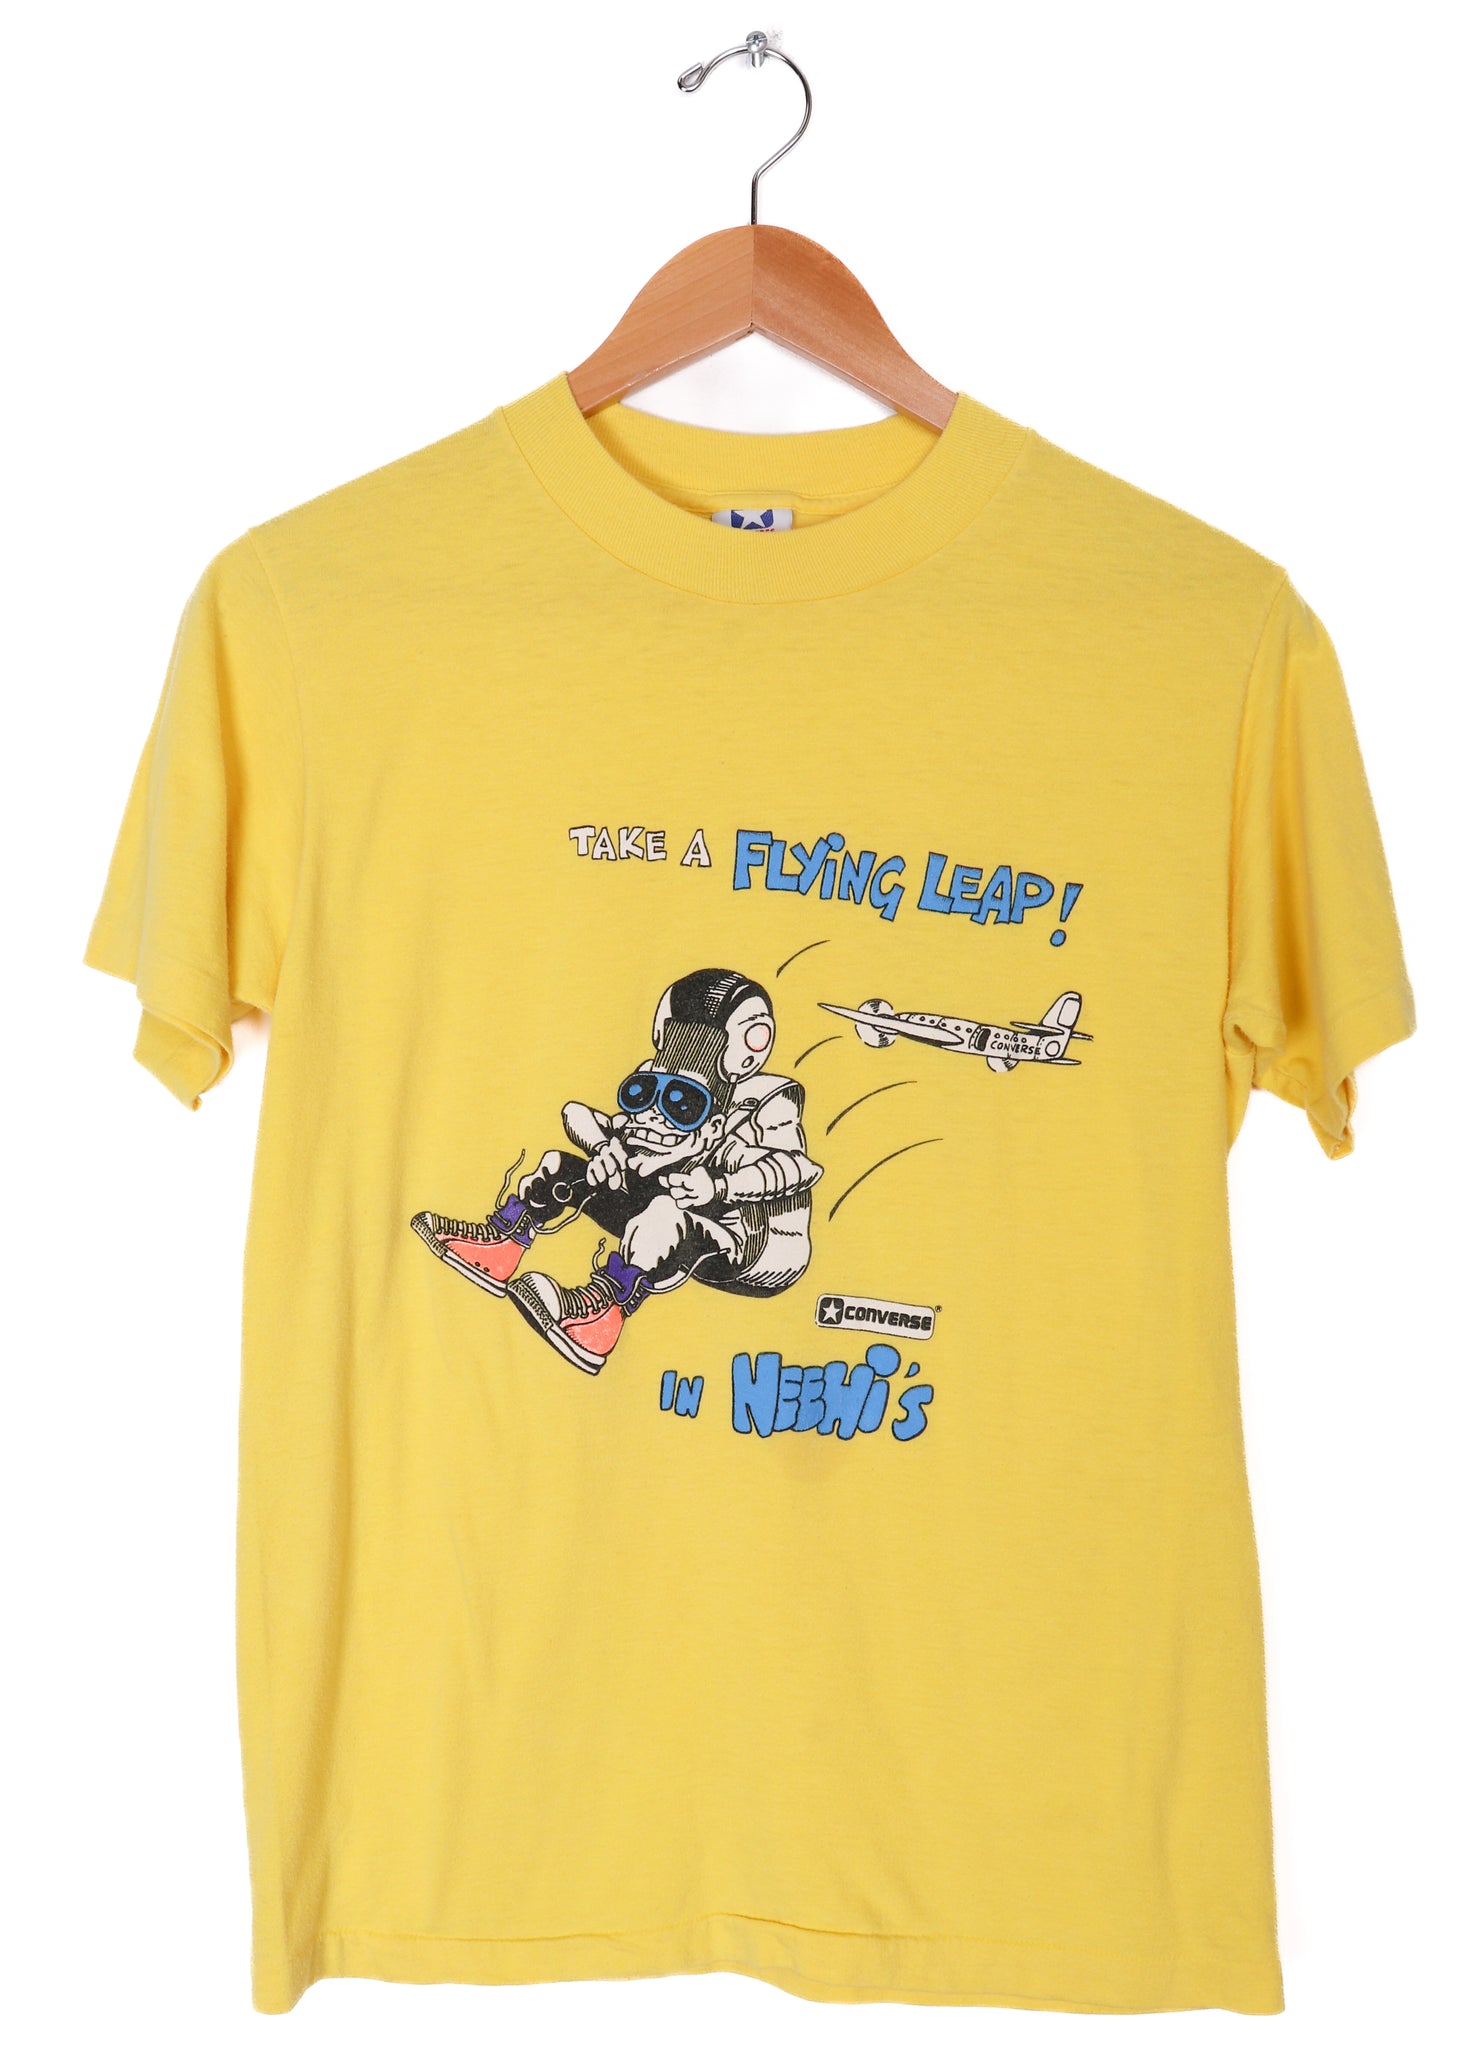 Vintage 80s Converse "Taking a flying leap in Neehi's" T-Shirt